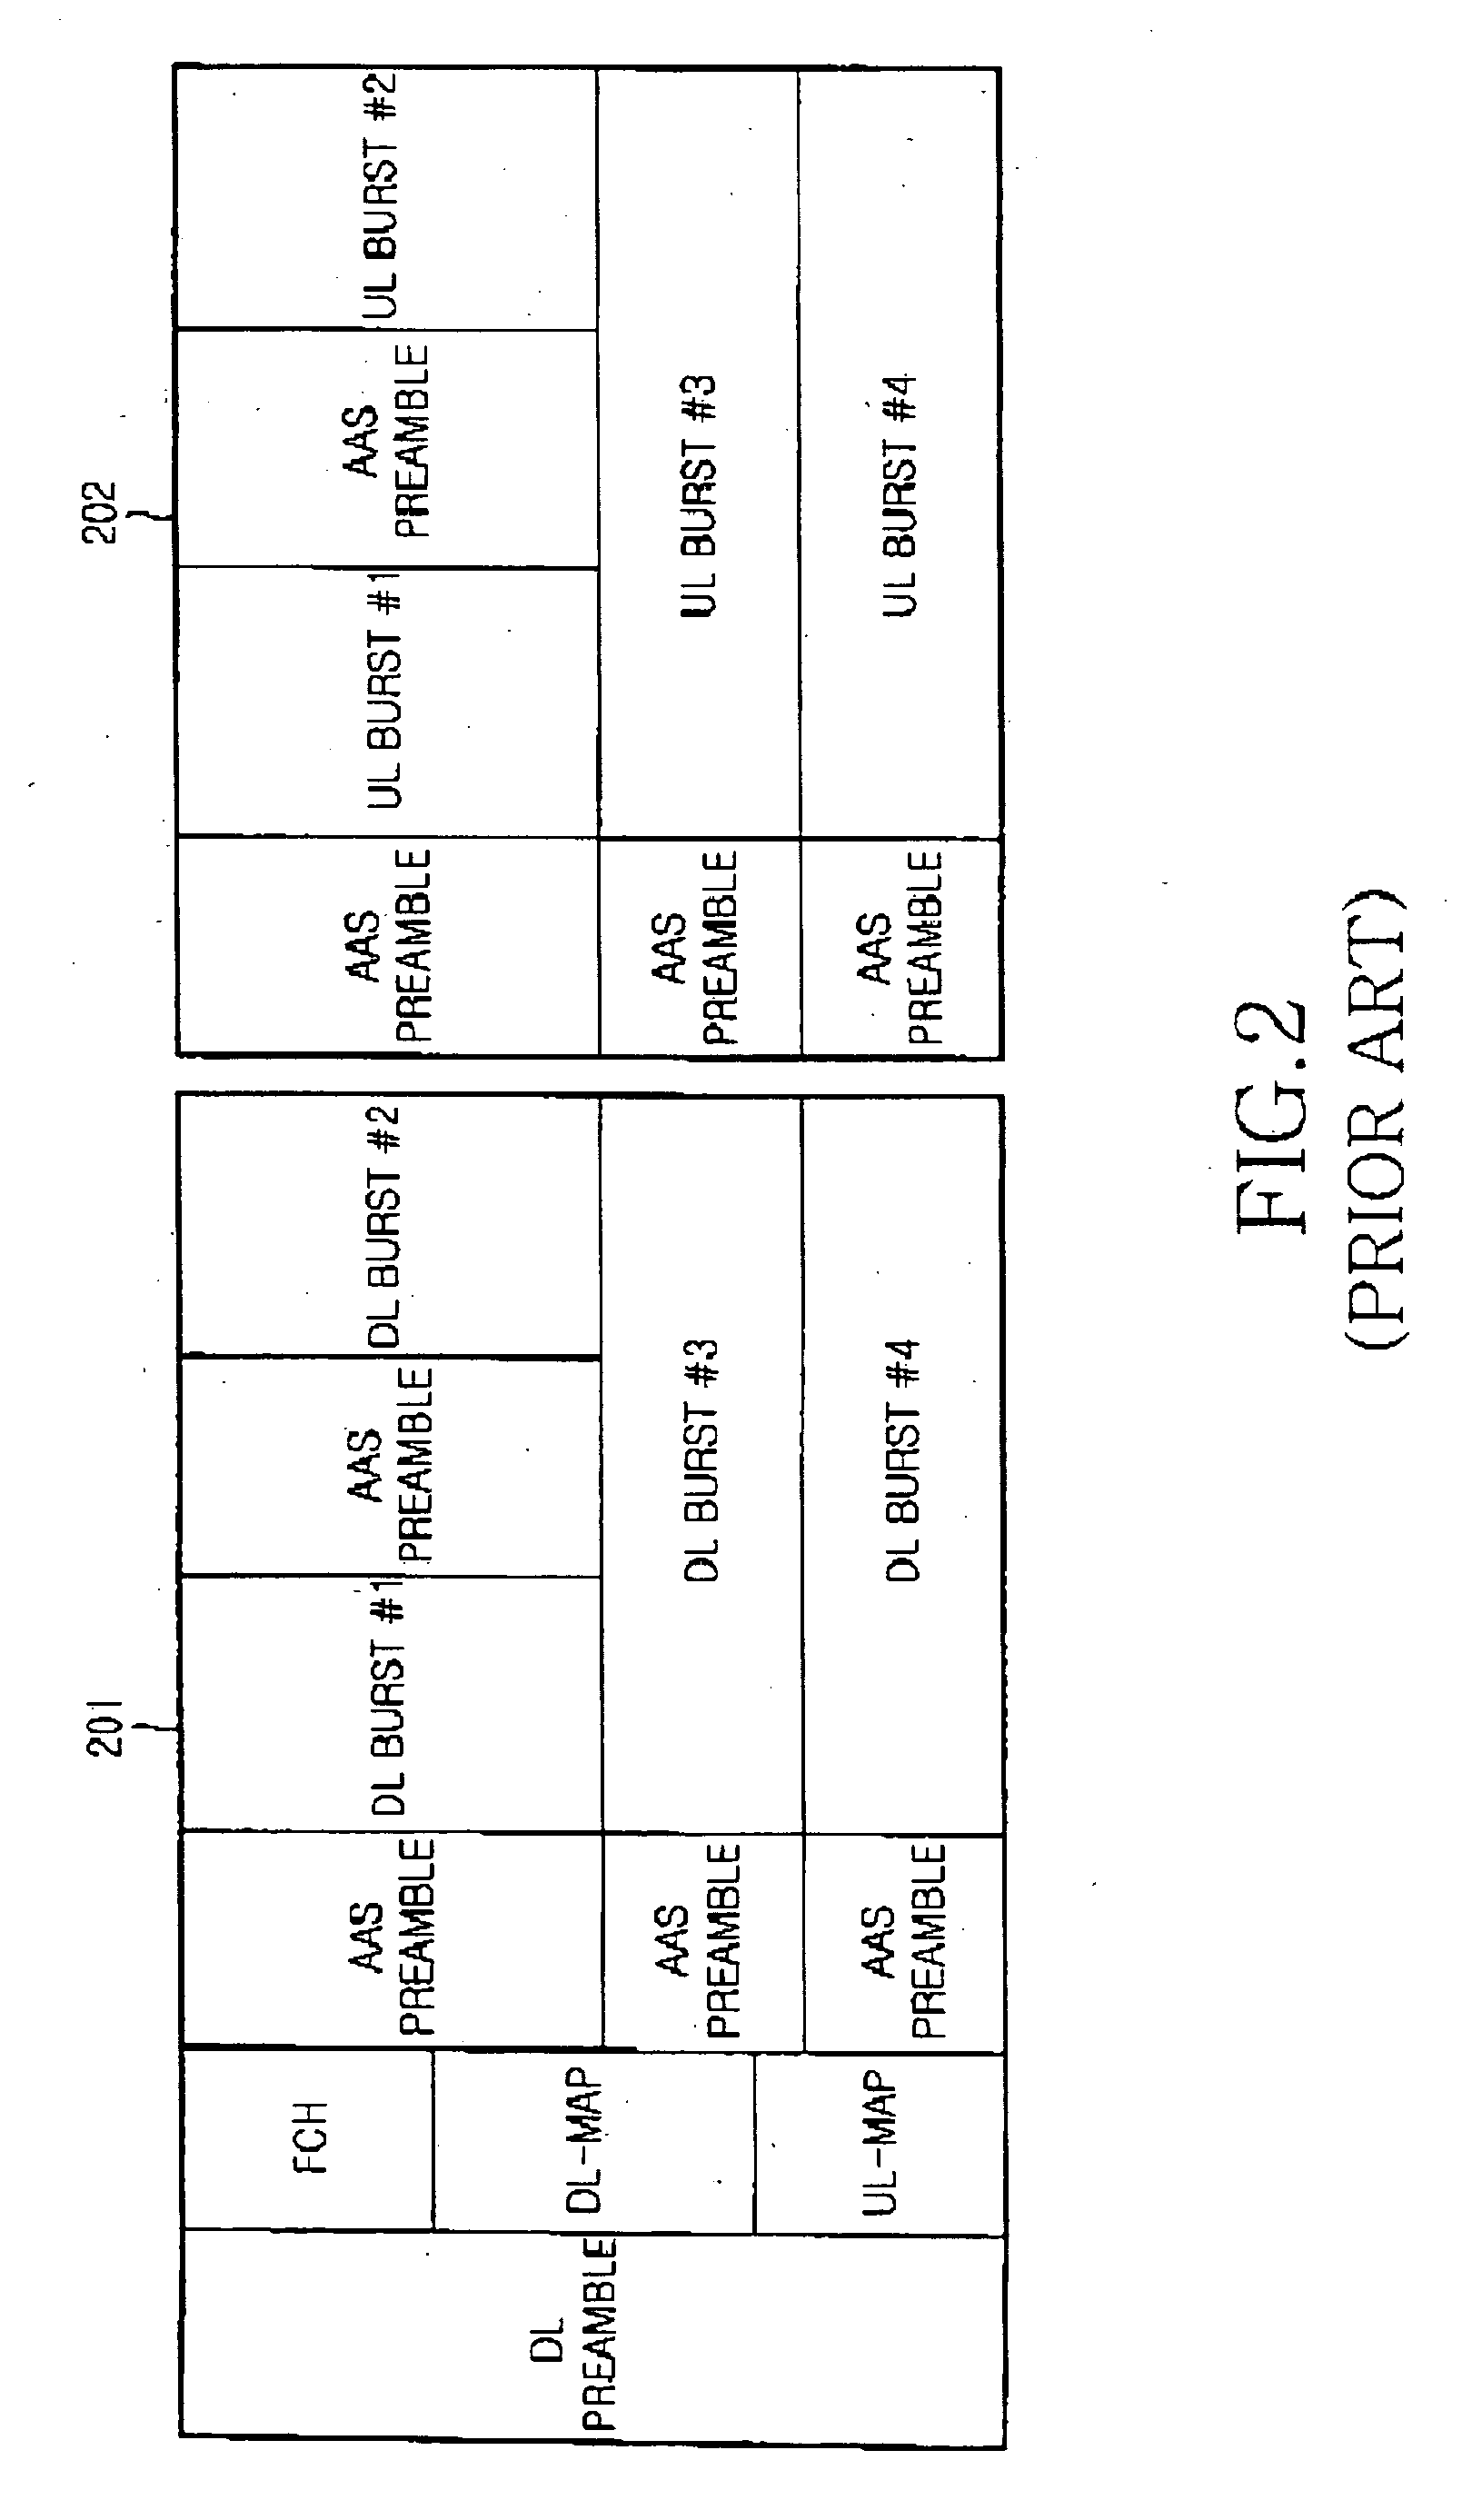 Apparatus and method for transmitting information data in a wireless communication system